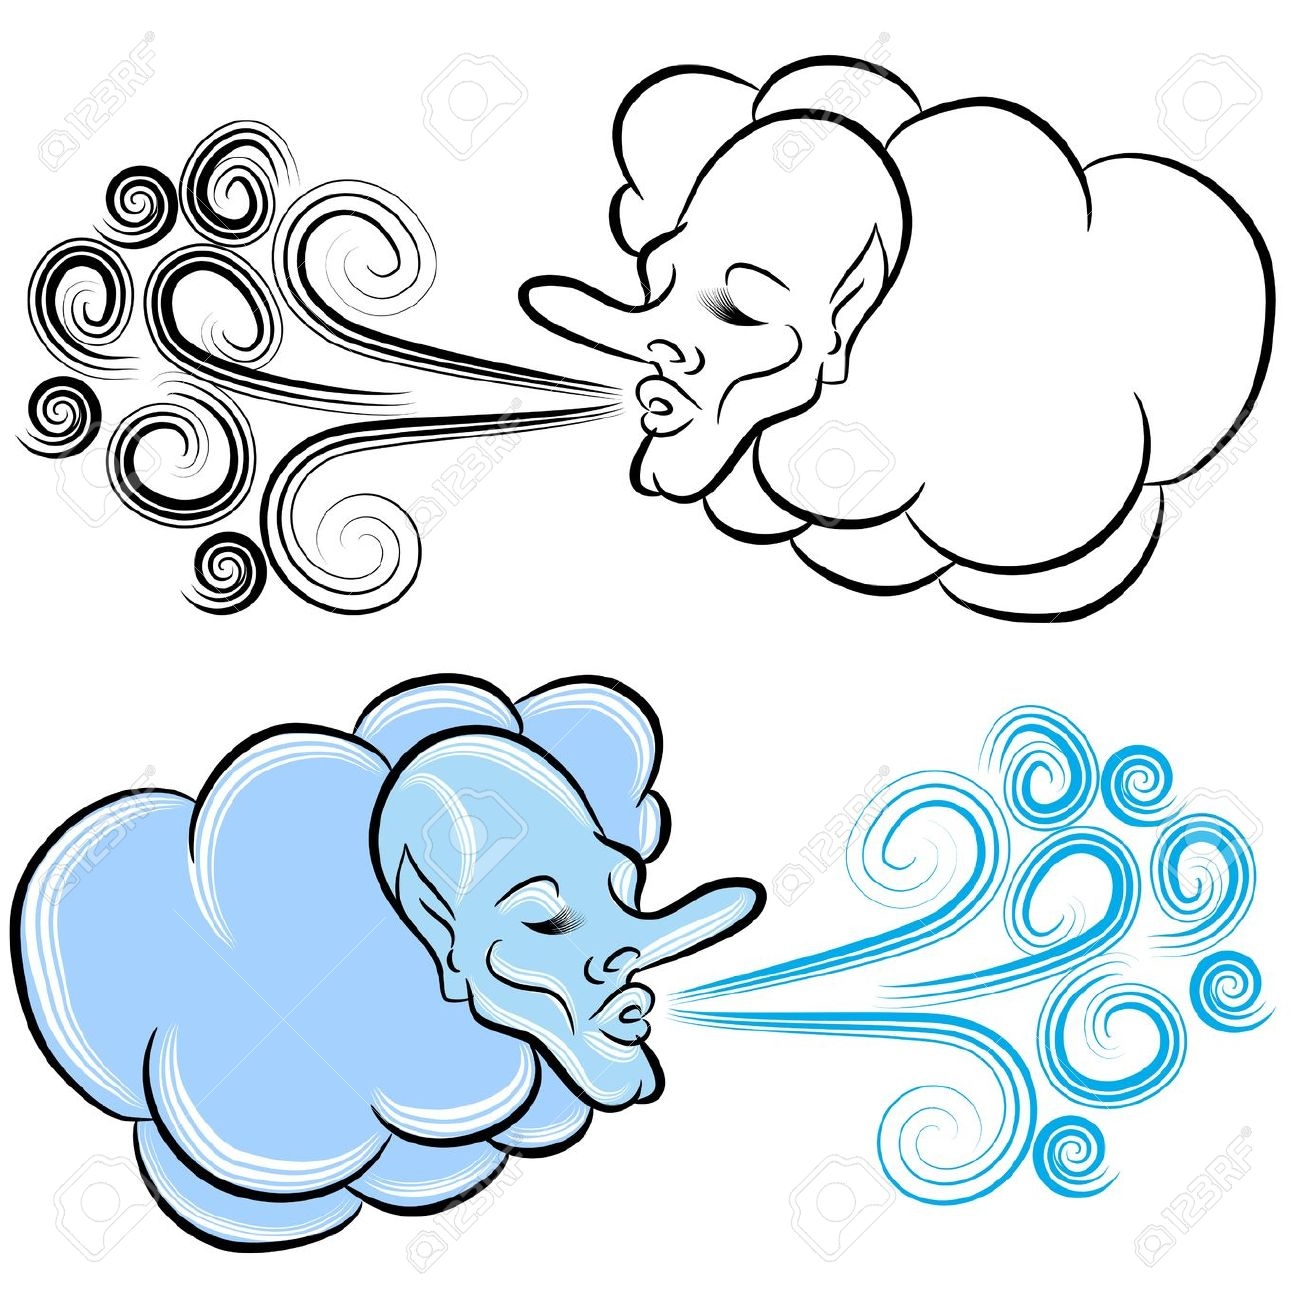 New gallery digital collection. Air clipart